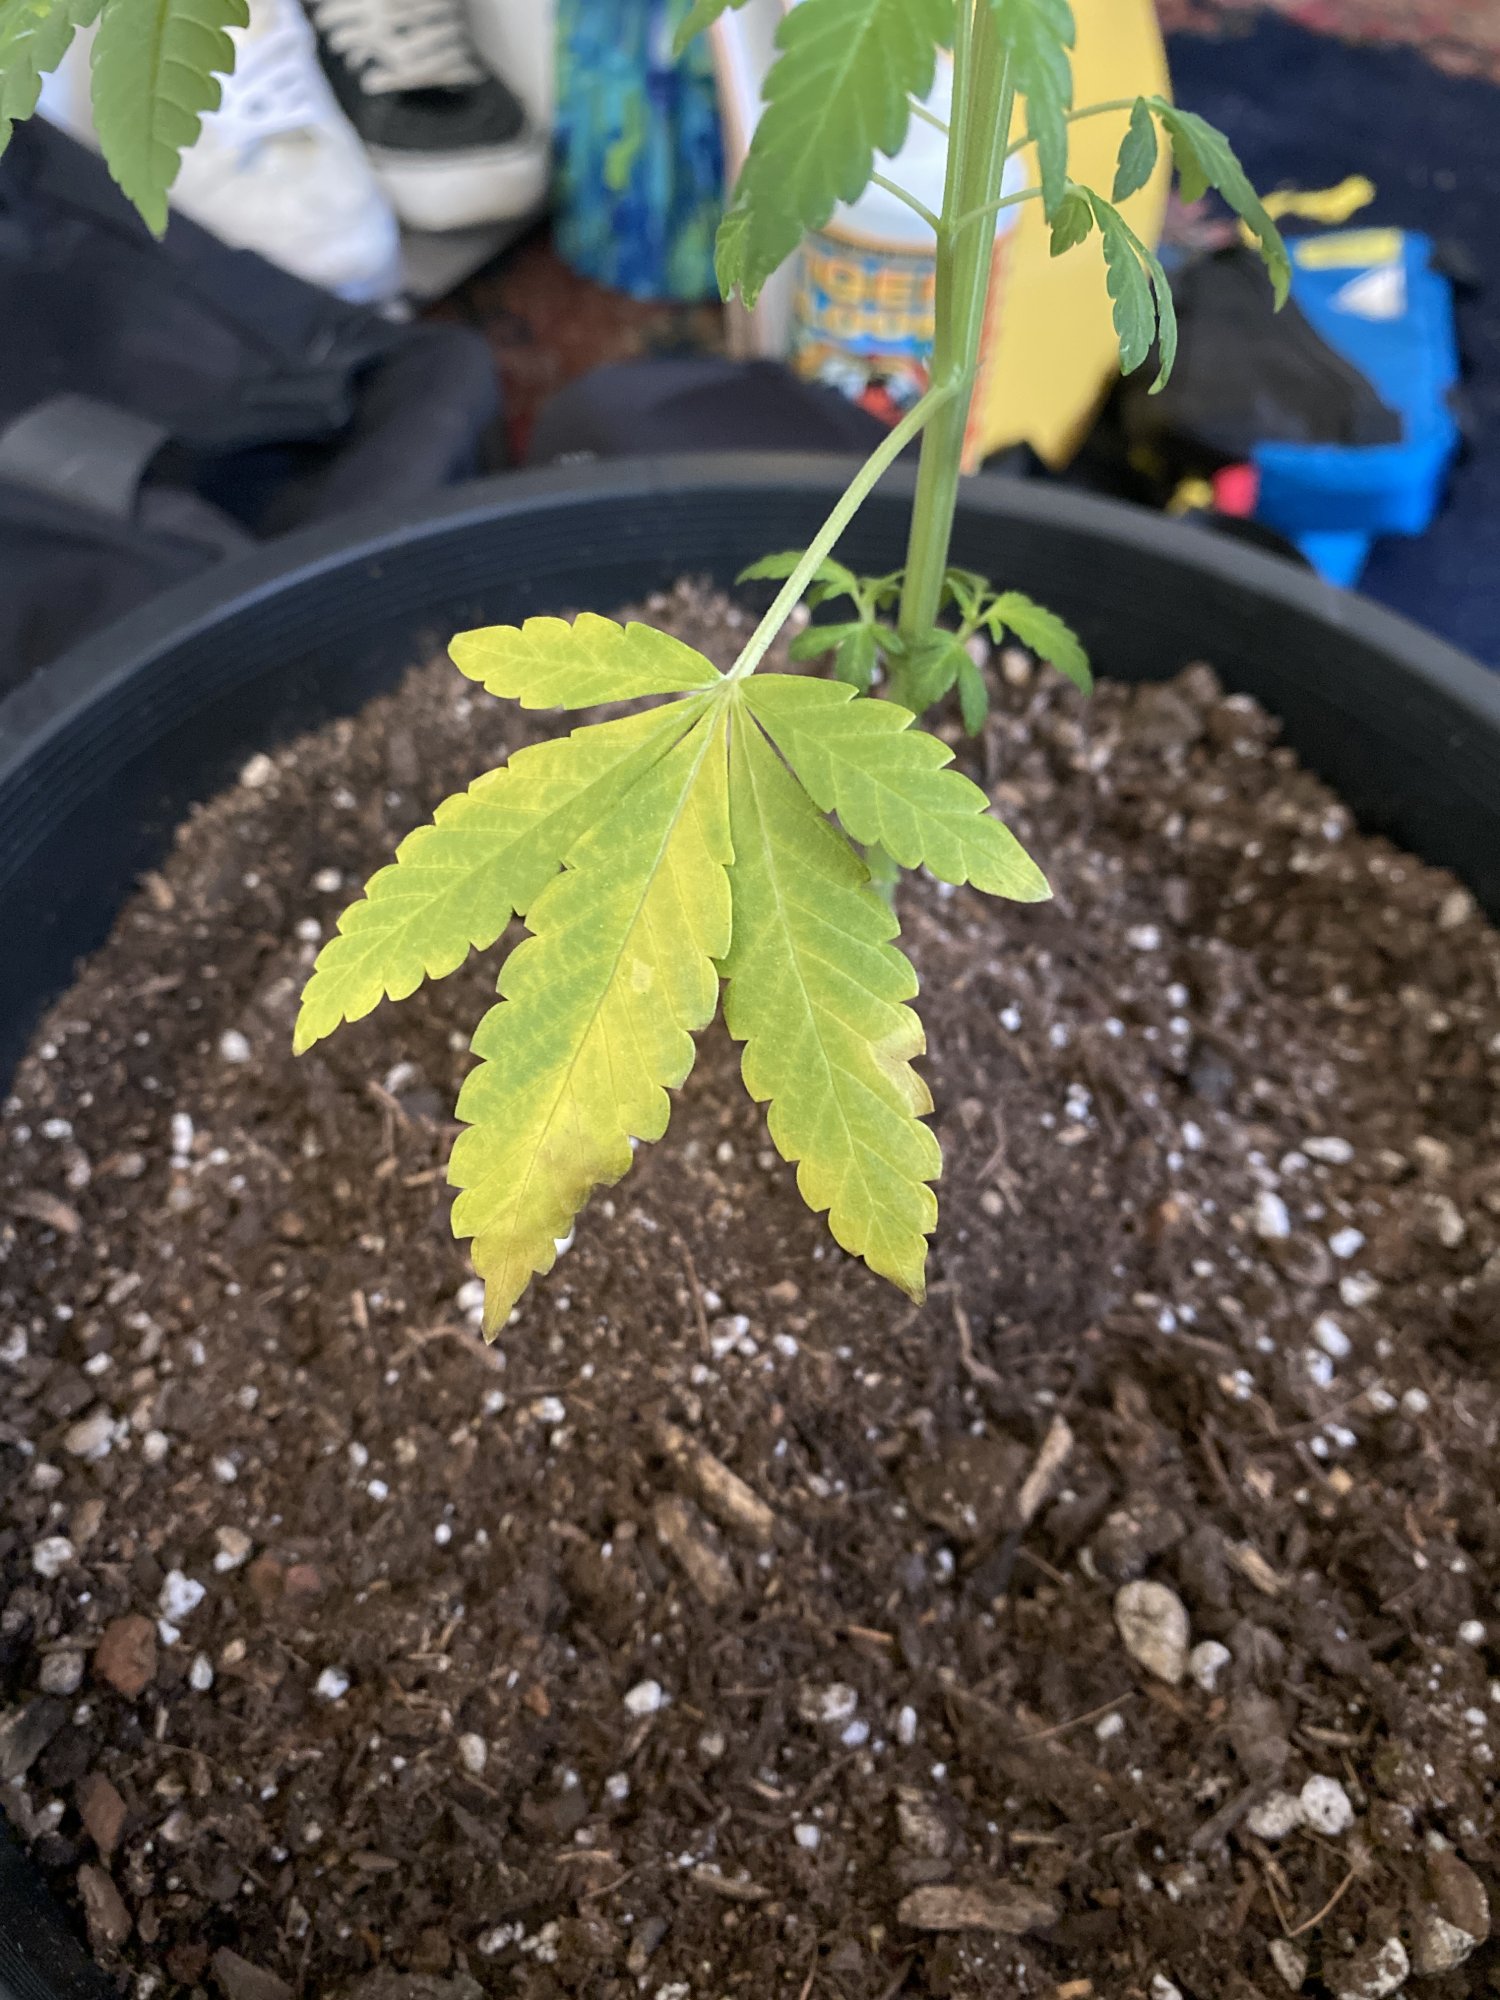 Help leaves are starting to yellow